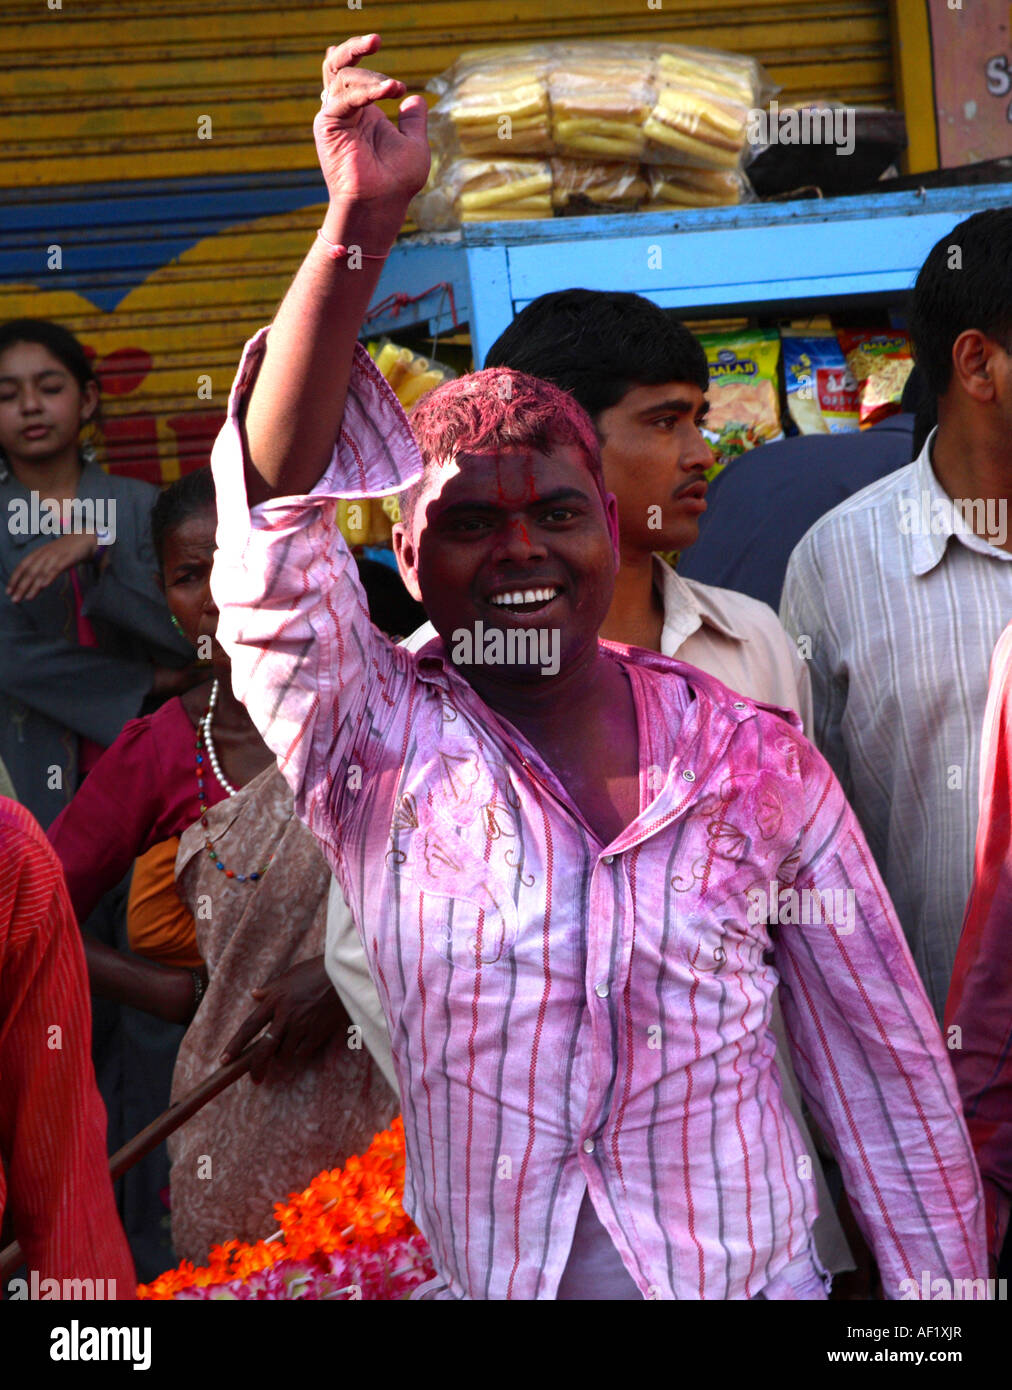 Indian male with clothes and hair coloured in pink paint celebrating holi spring festival of colours, Dwarka, Gujarat, India Stock Photo